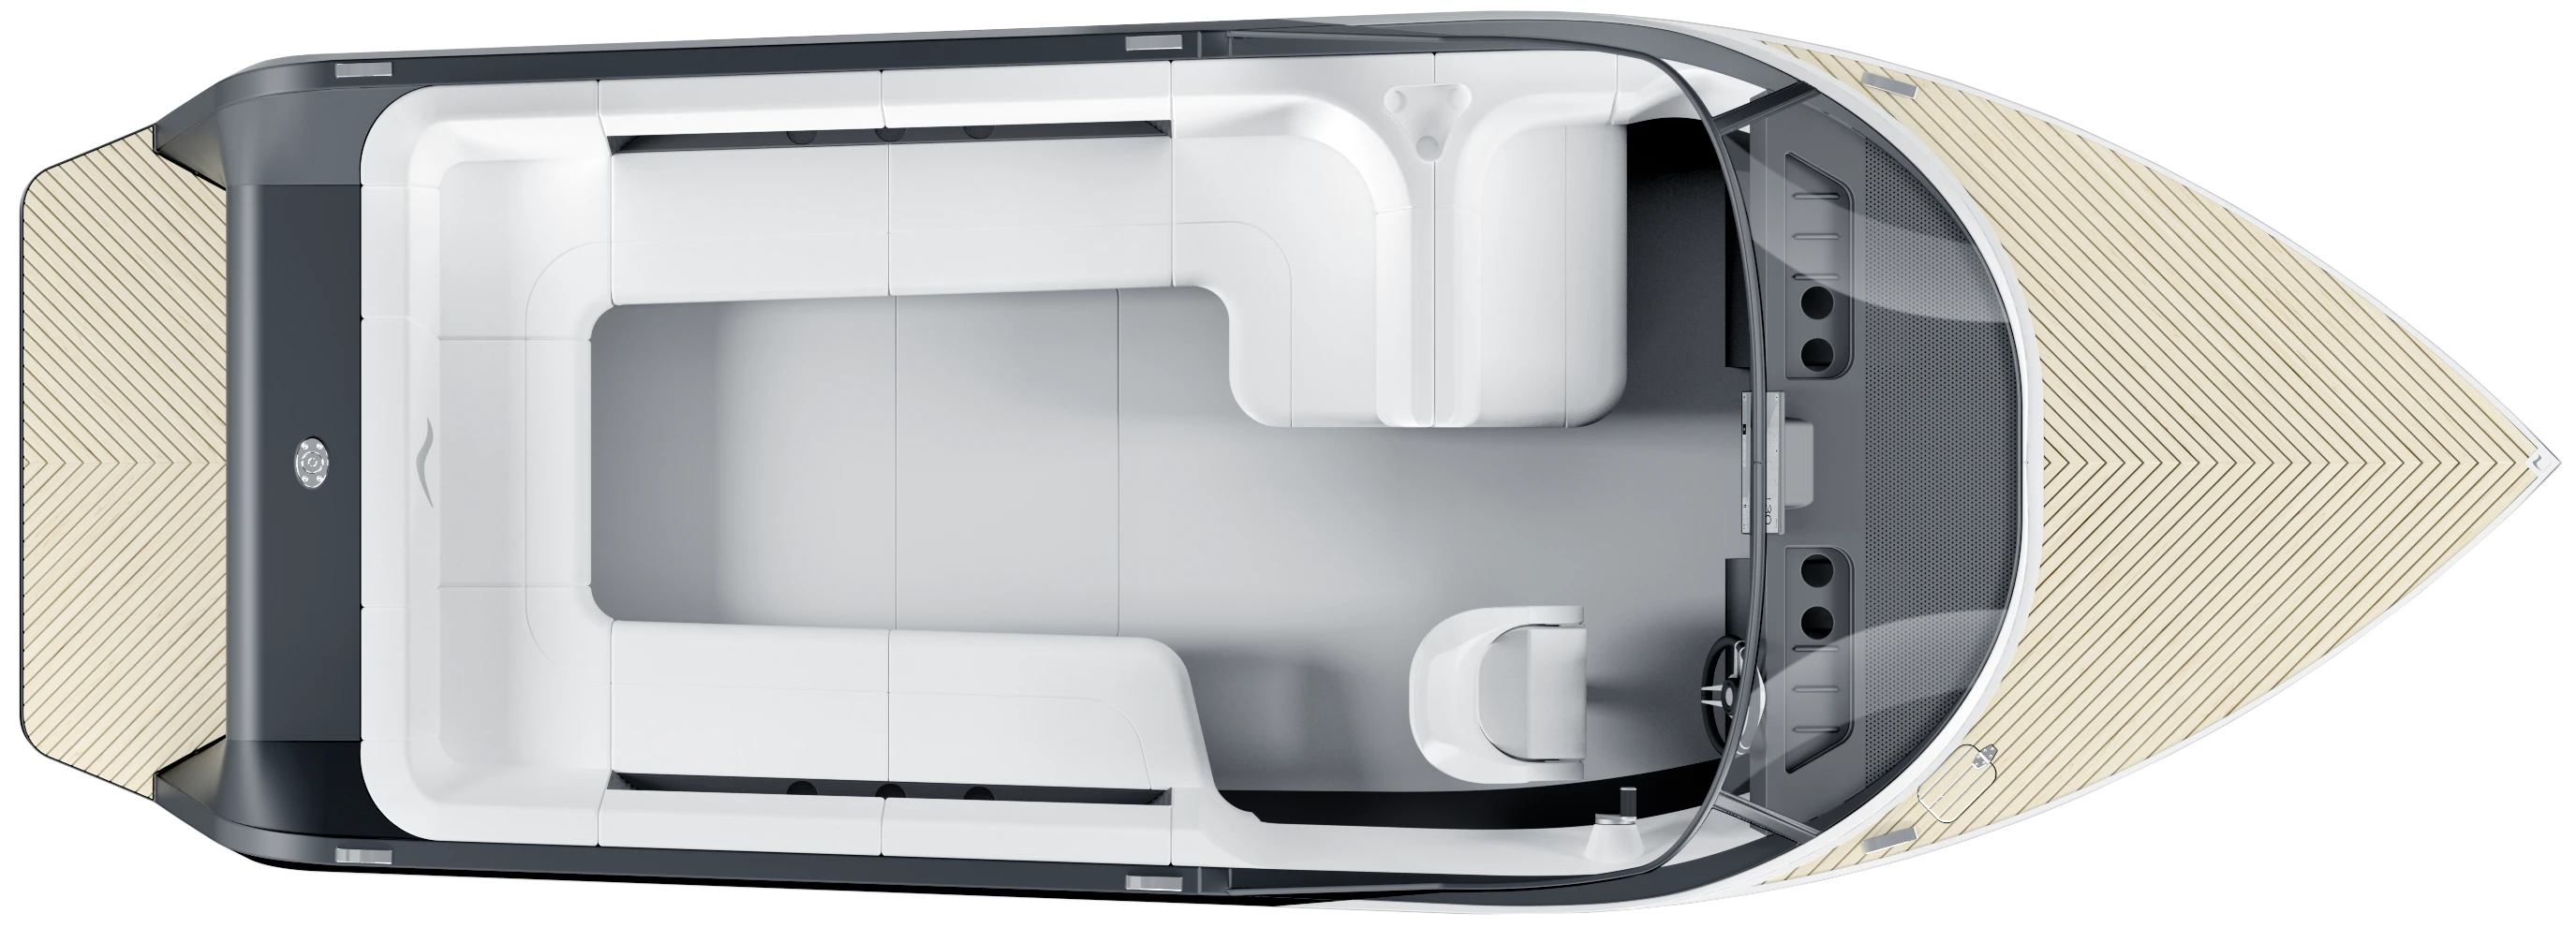 A 3D model of the Arc One showing the boat interior's minimalist design from above